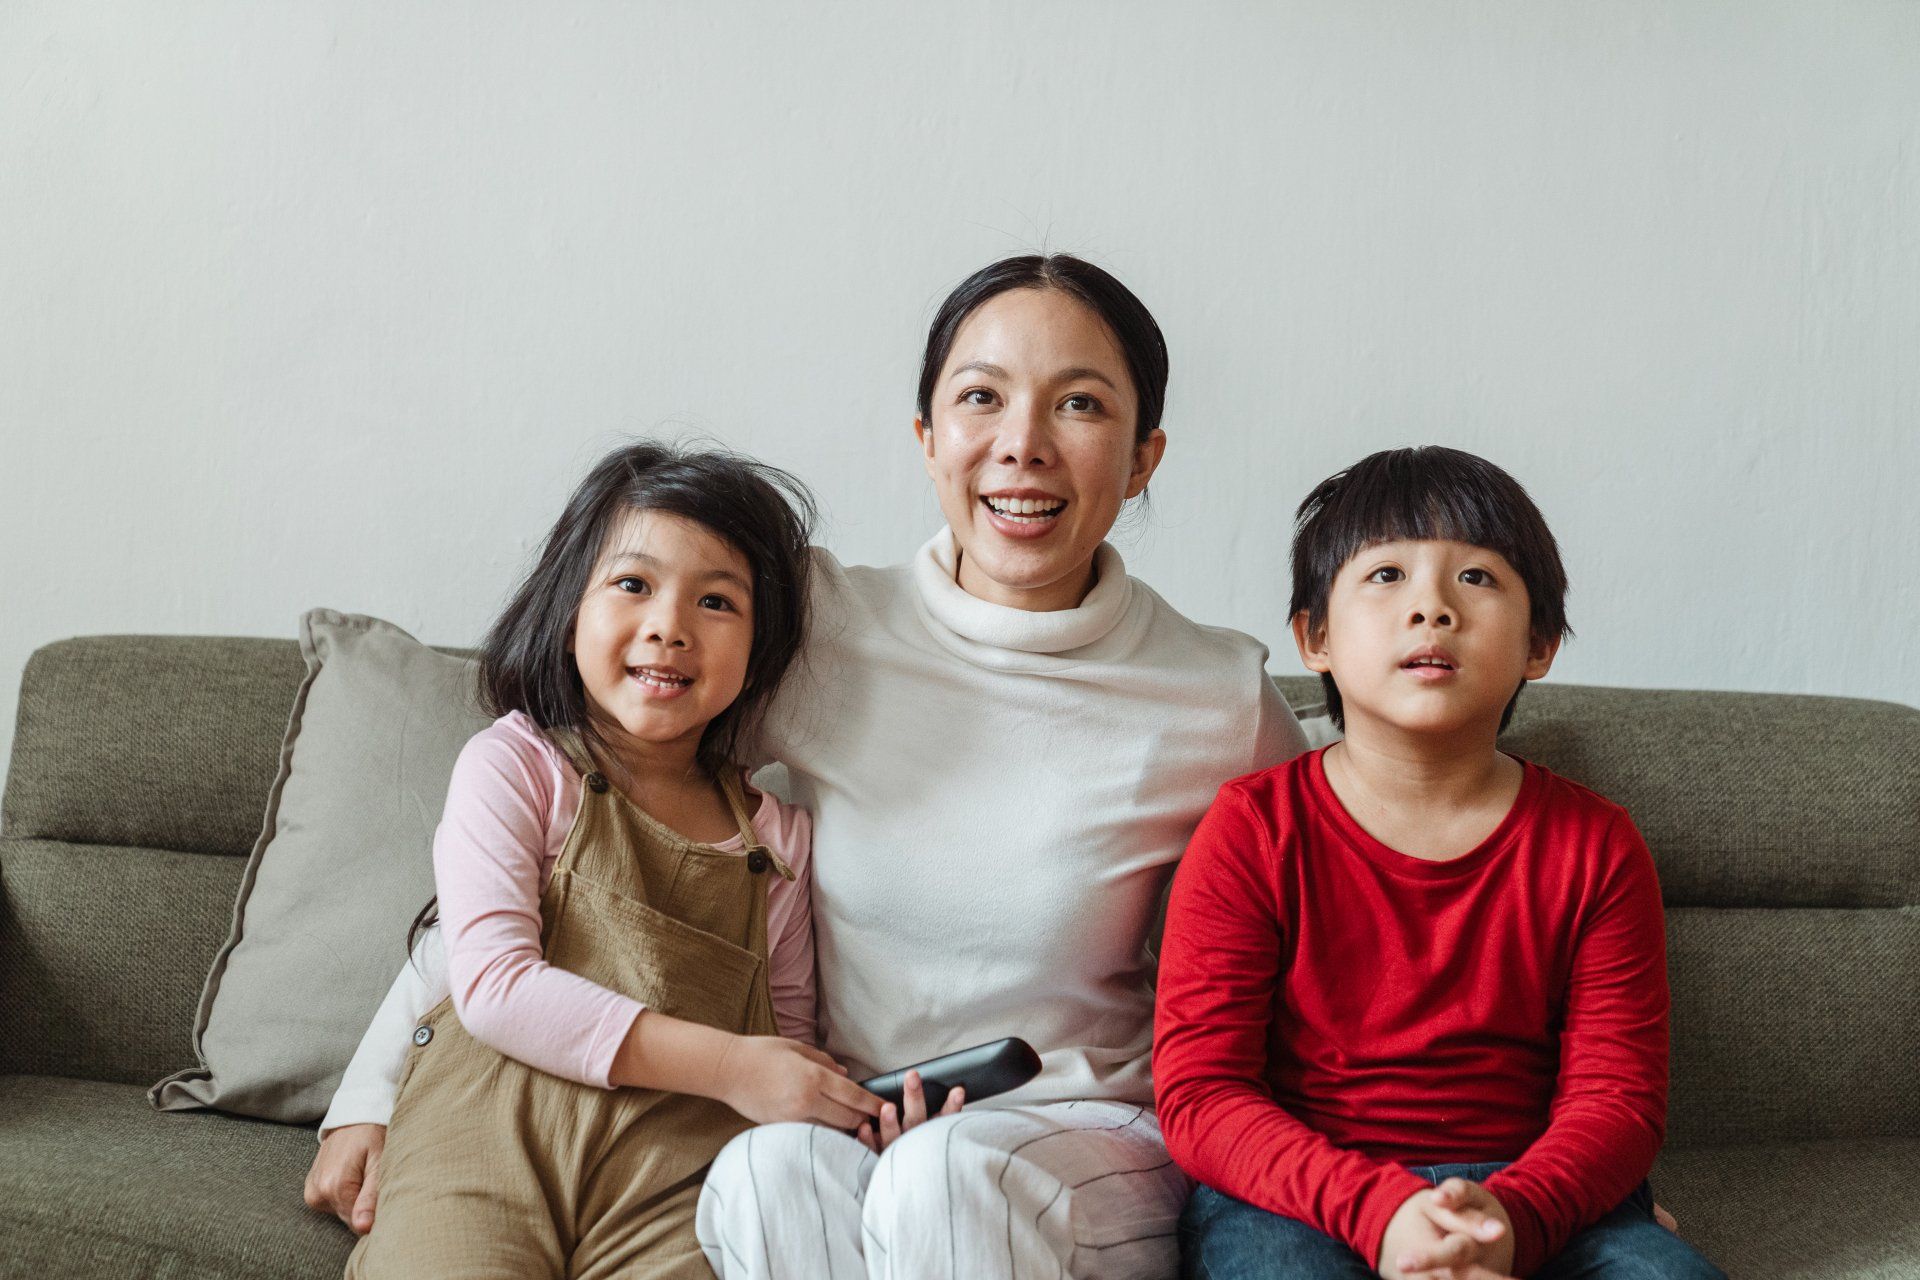 A woman and two children are sitting on a couch watching tv.